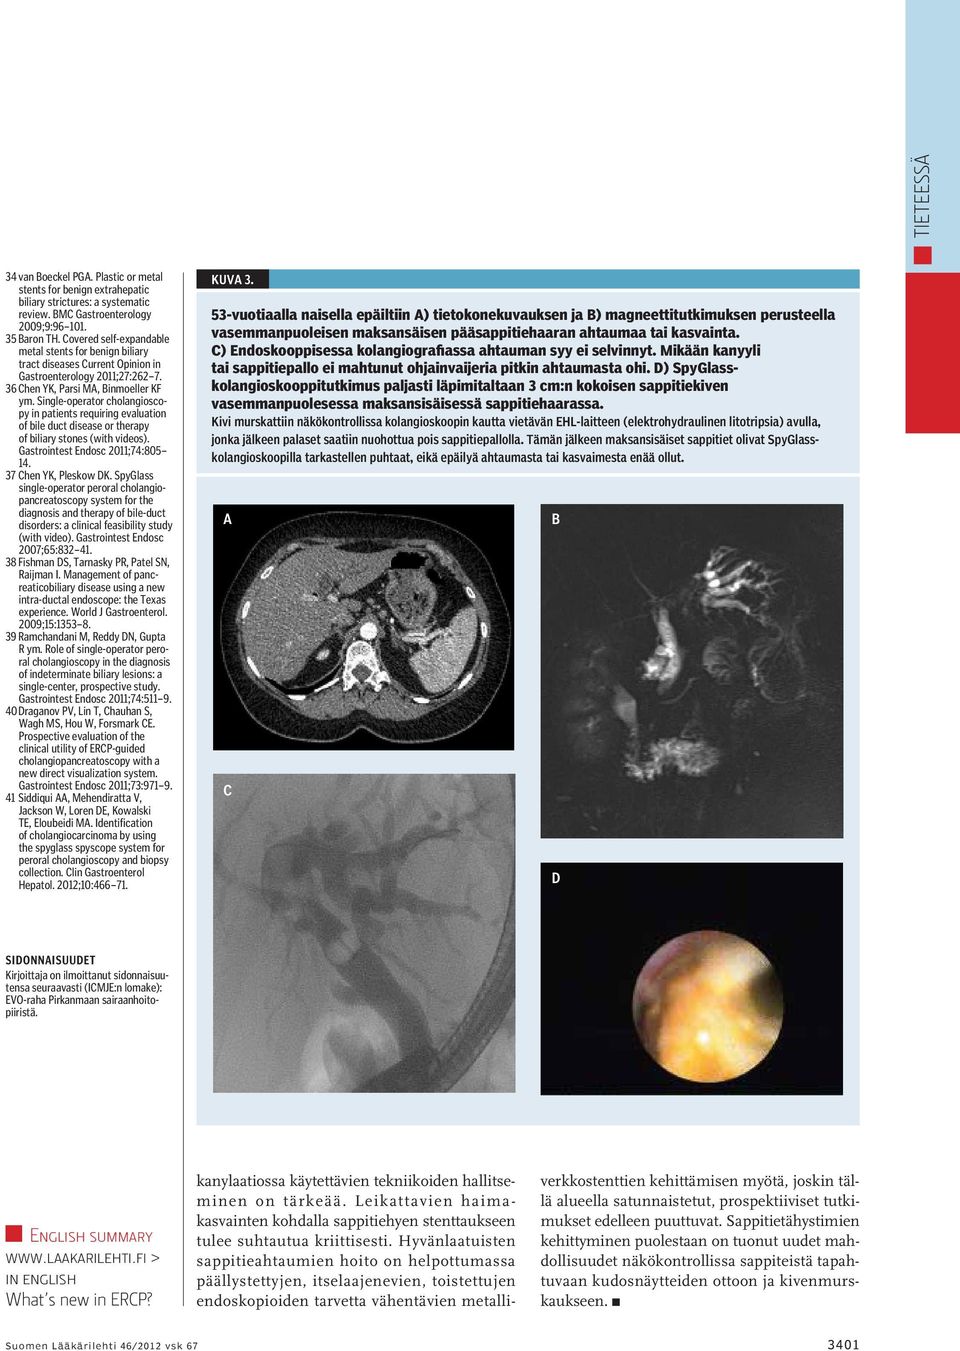 Single-operator cholangioscopy in patients requiring evaluation of bile duct disease or therapy of biliary stones (with videos). Gastrointest Endosc 2011;74:805 14. 37 Chen YK, Pleskow DK.